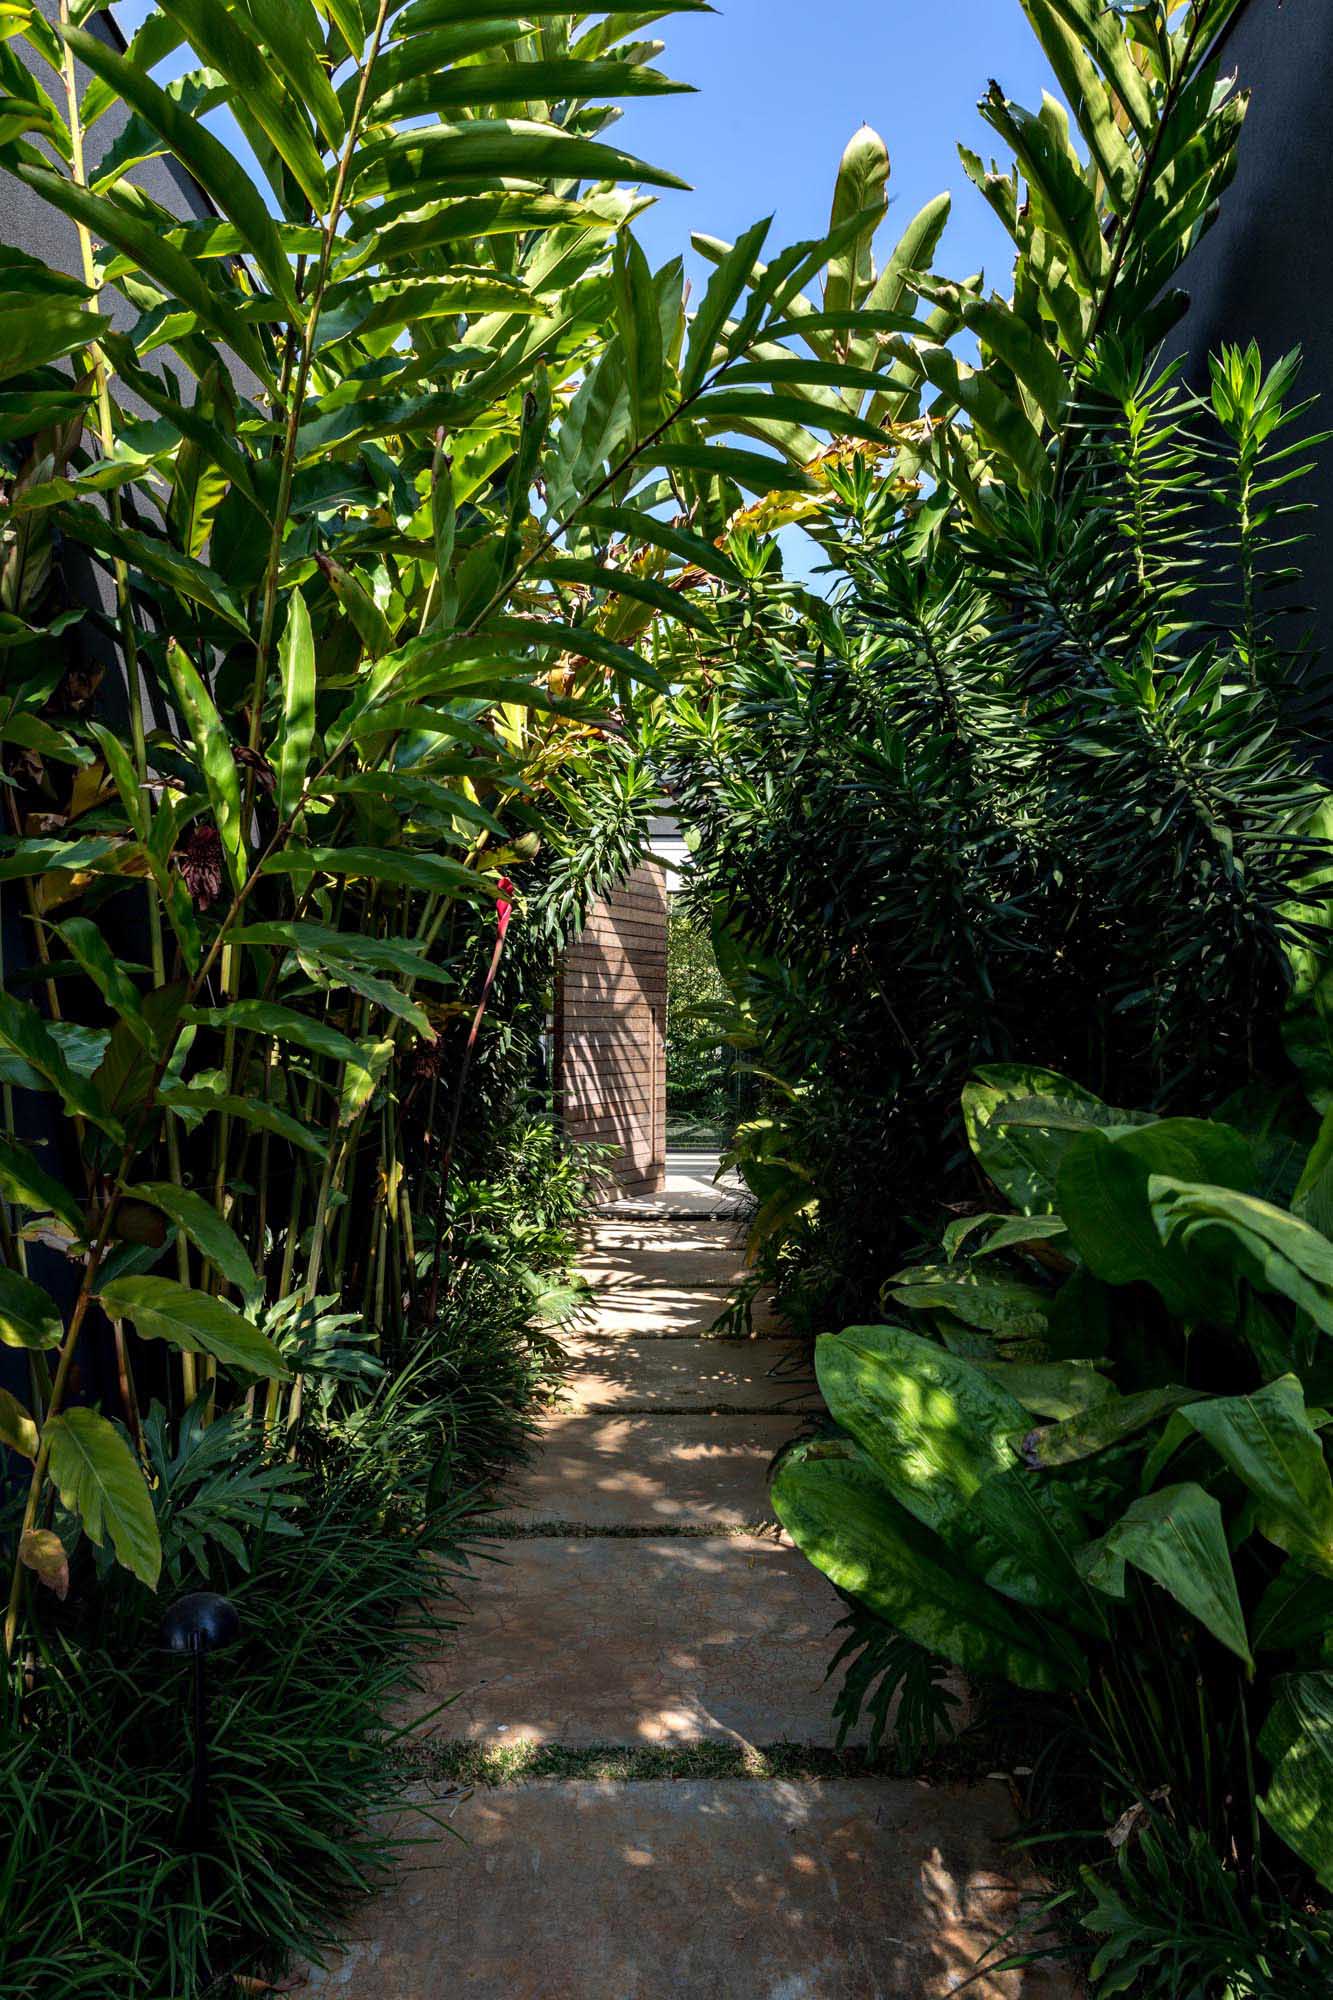 Tropical plants line a pathway that leads to the entryway of the home, where you'll find a pivoting front door with views of a garden through glass walls. 